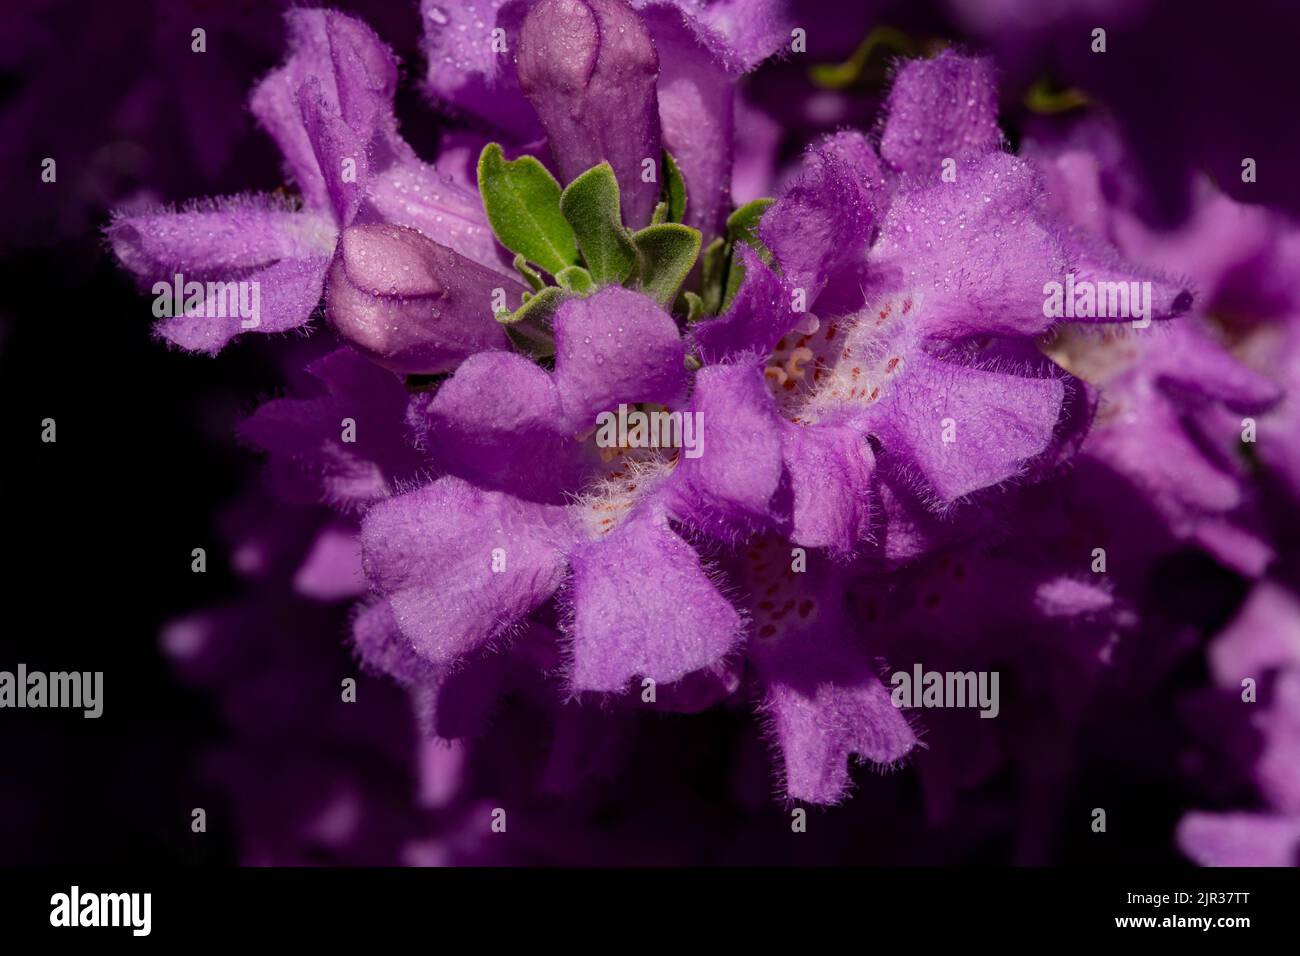 Close up of purple flowers on drought resistant Texas Sage, also known as Texas Ranger and Barometer Bush, flowering after monsoon rains in Arizona Stock Photo